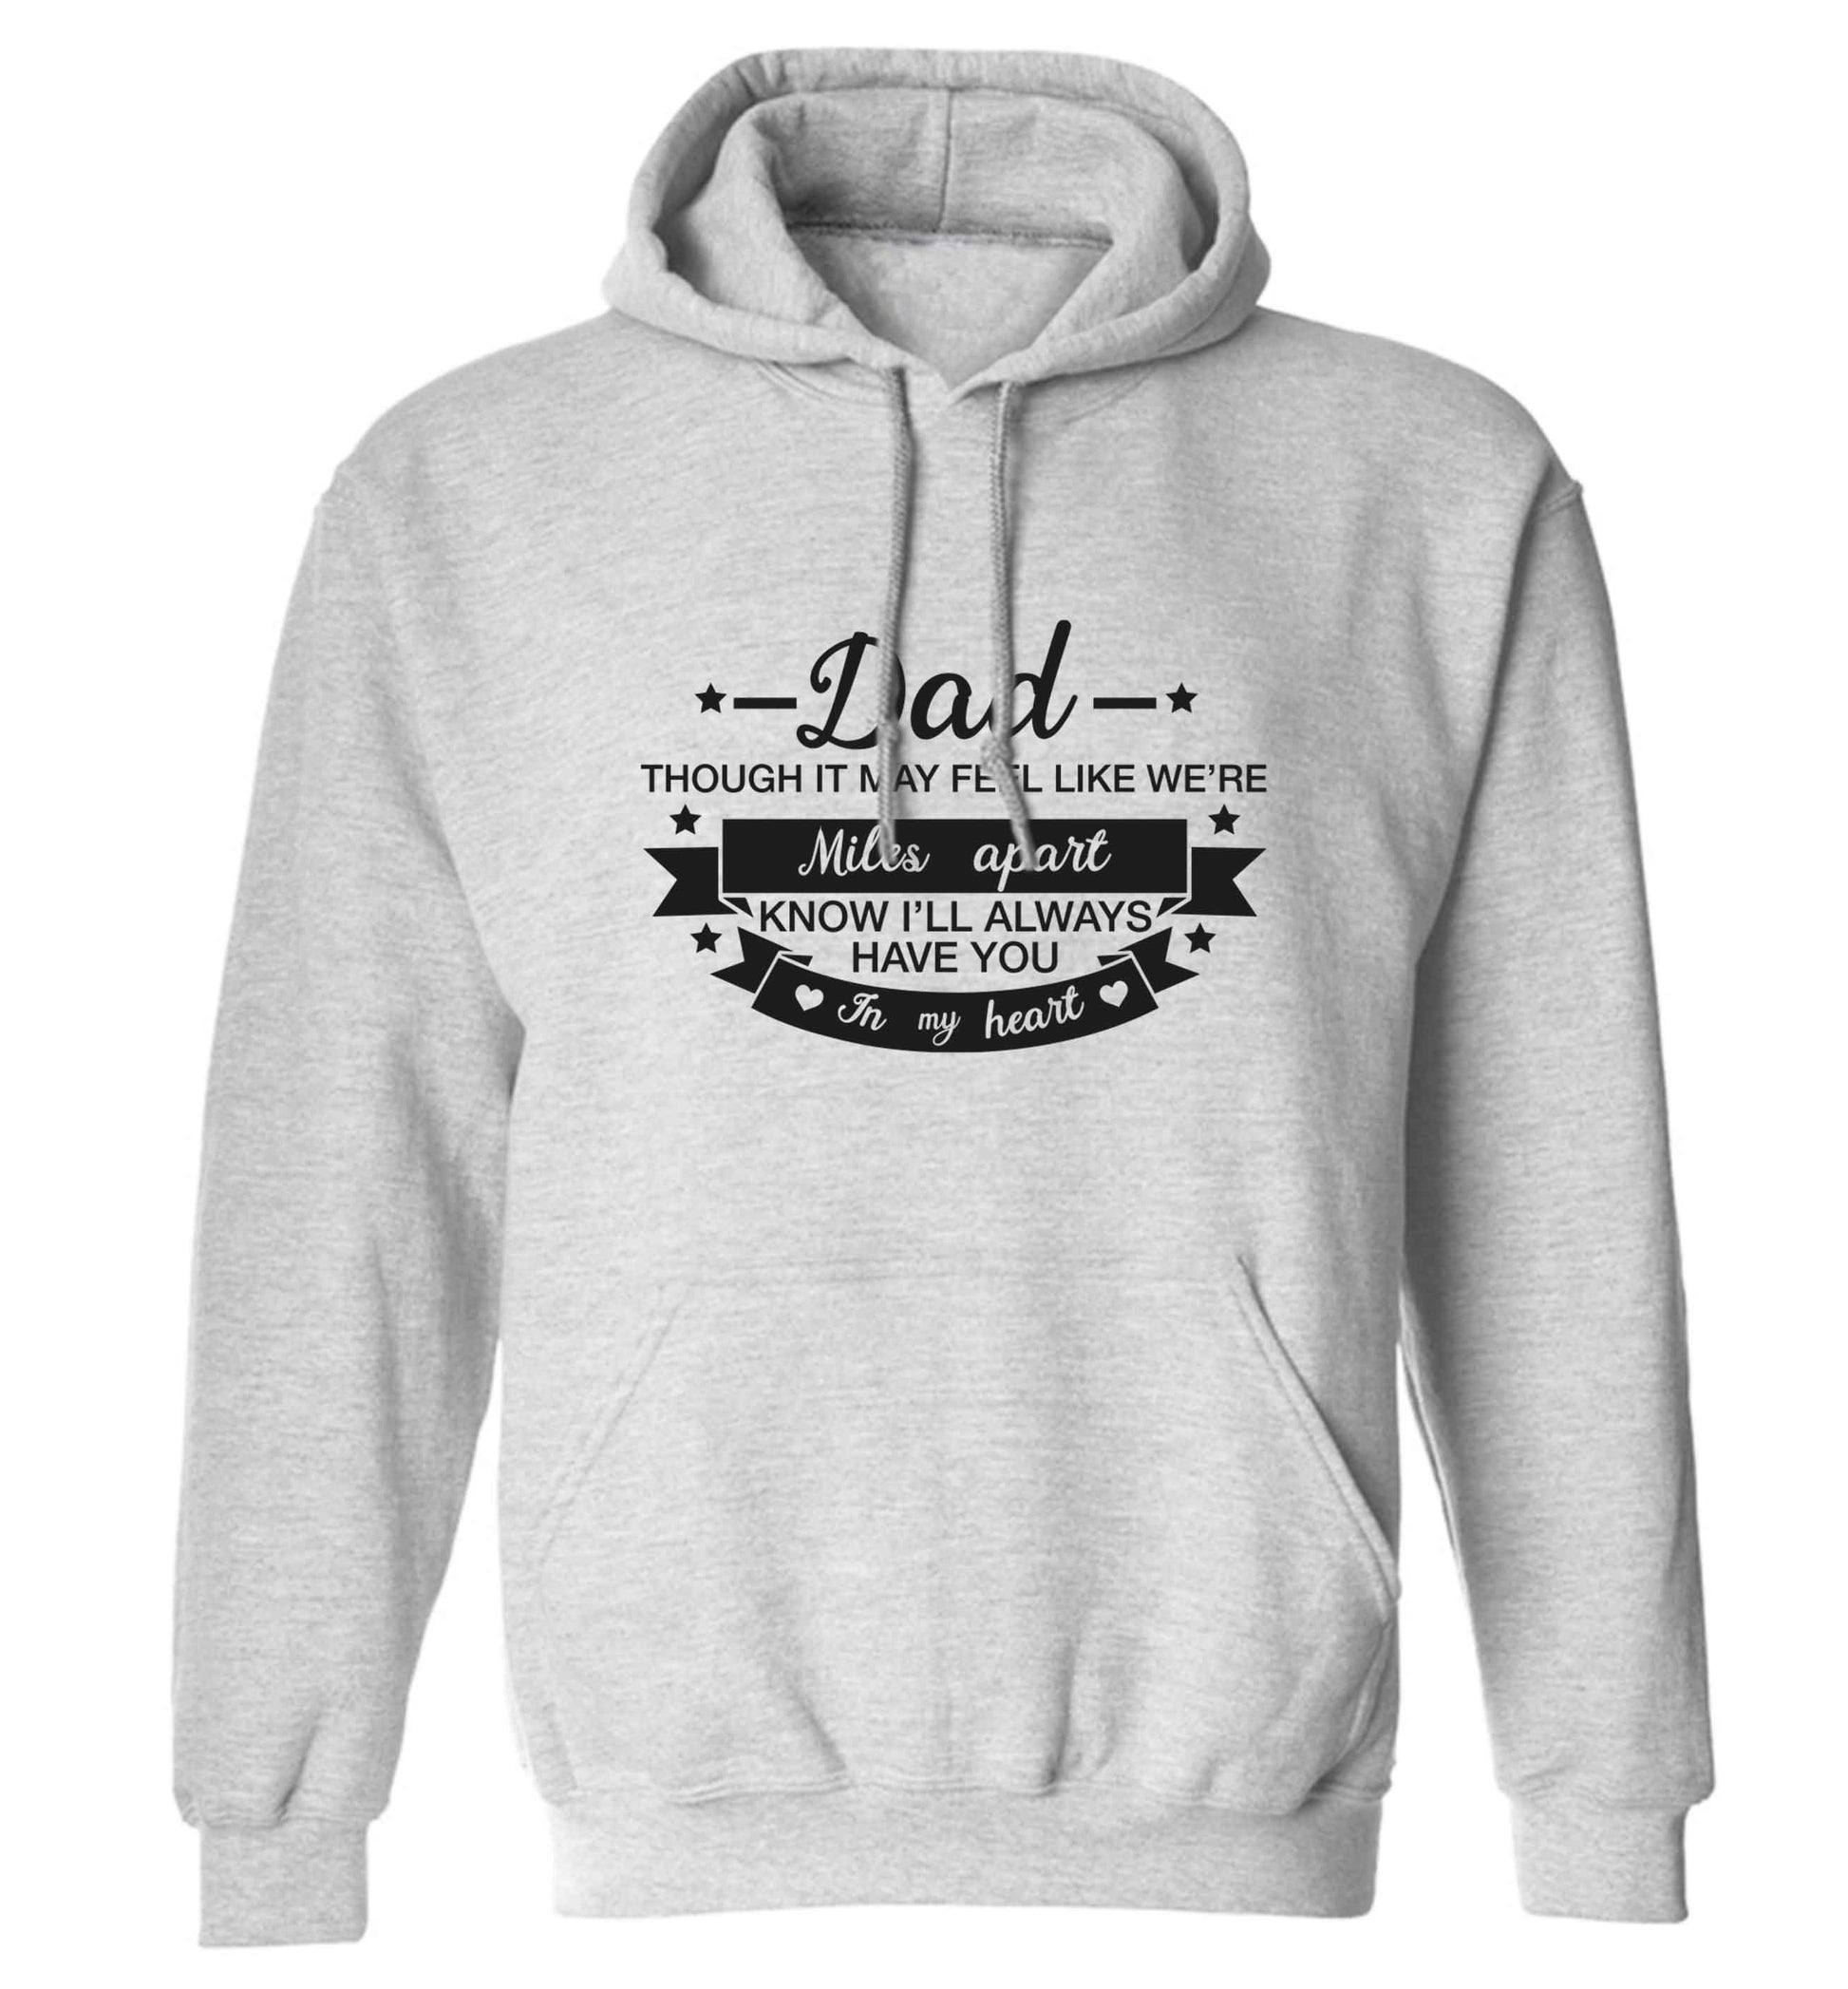 Dad though it may feel like we're miles apart know I'll always have you in my heart adults unisex grey hoodie 2XL